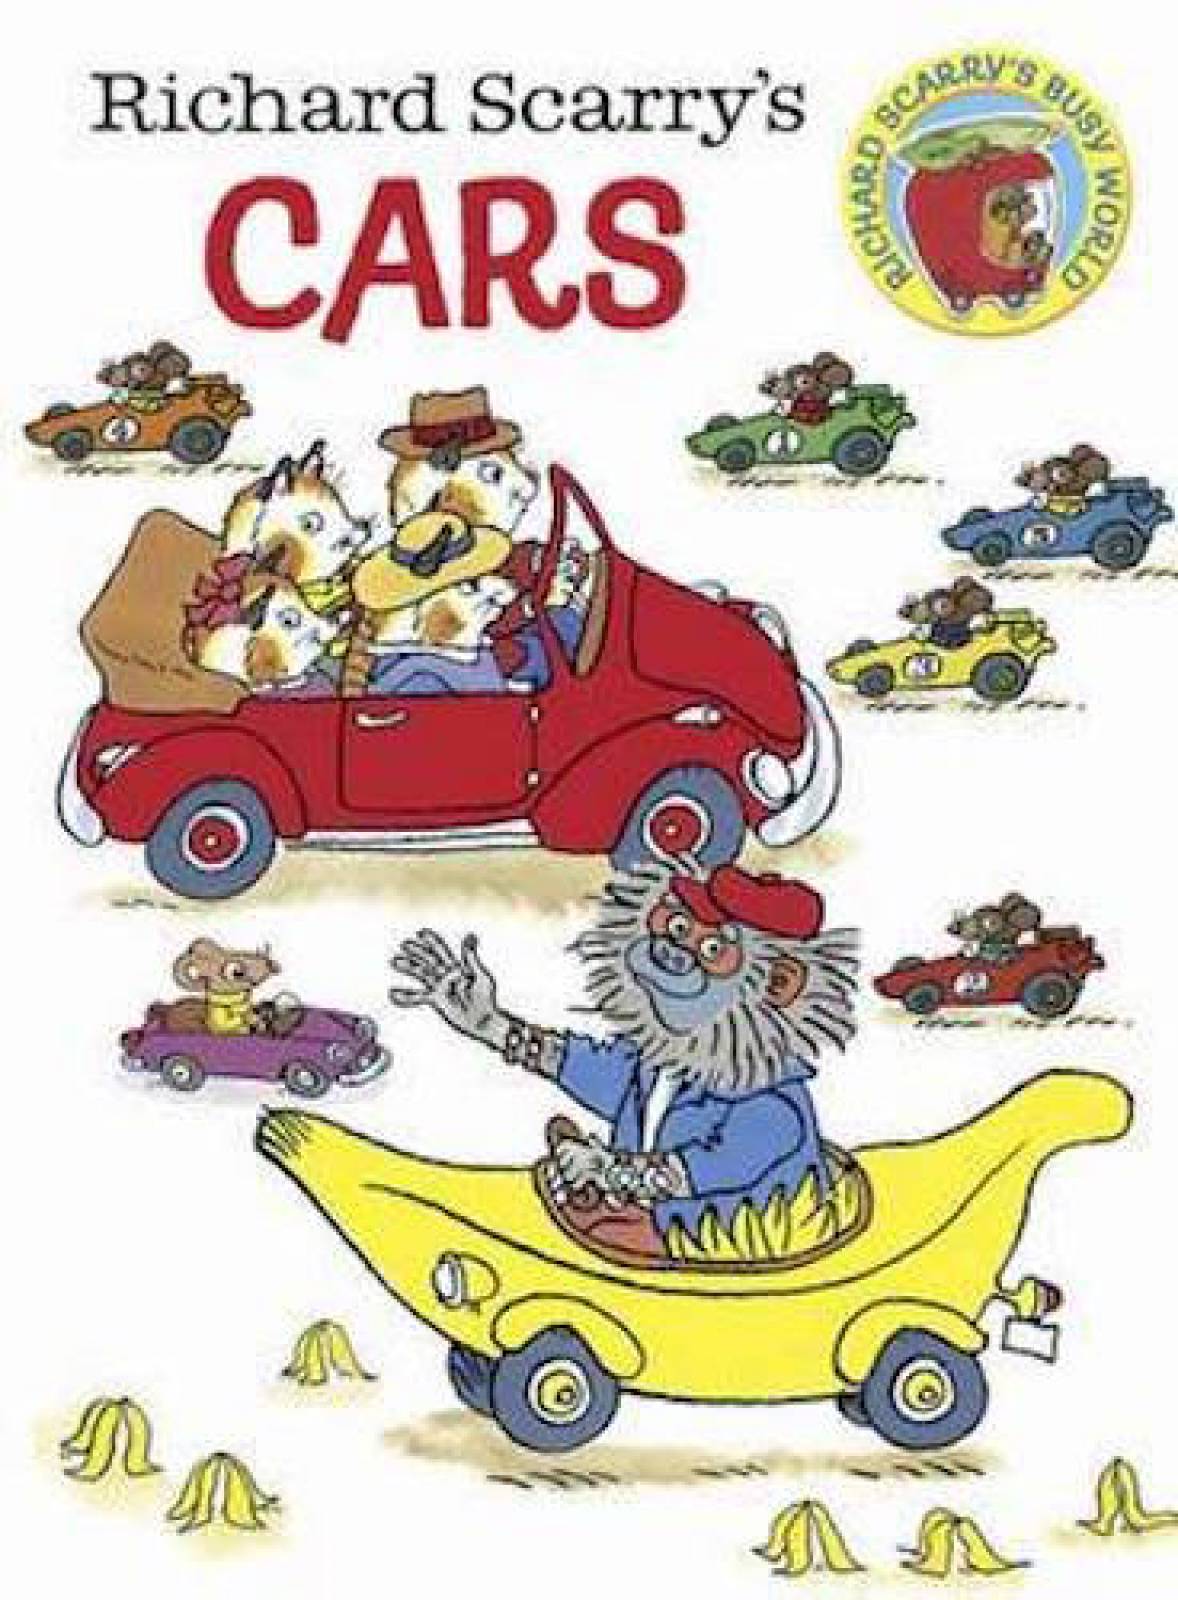 Richard Scarry's Cars Board Book